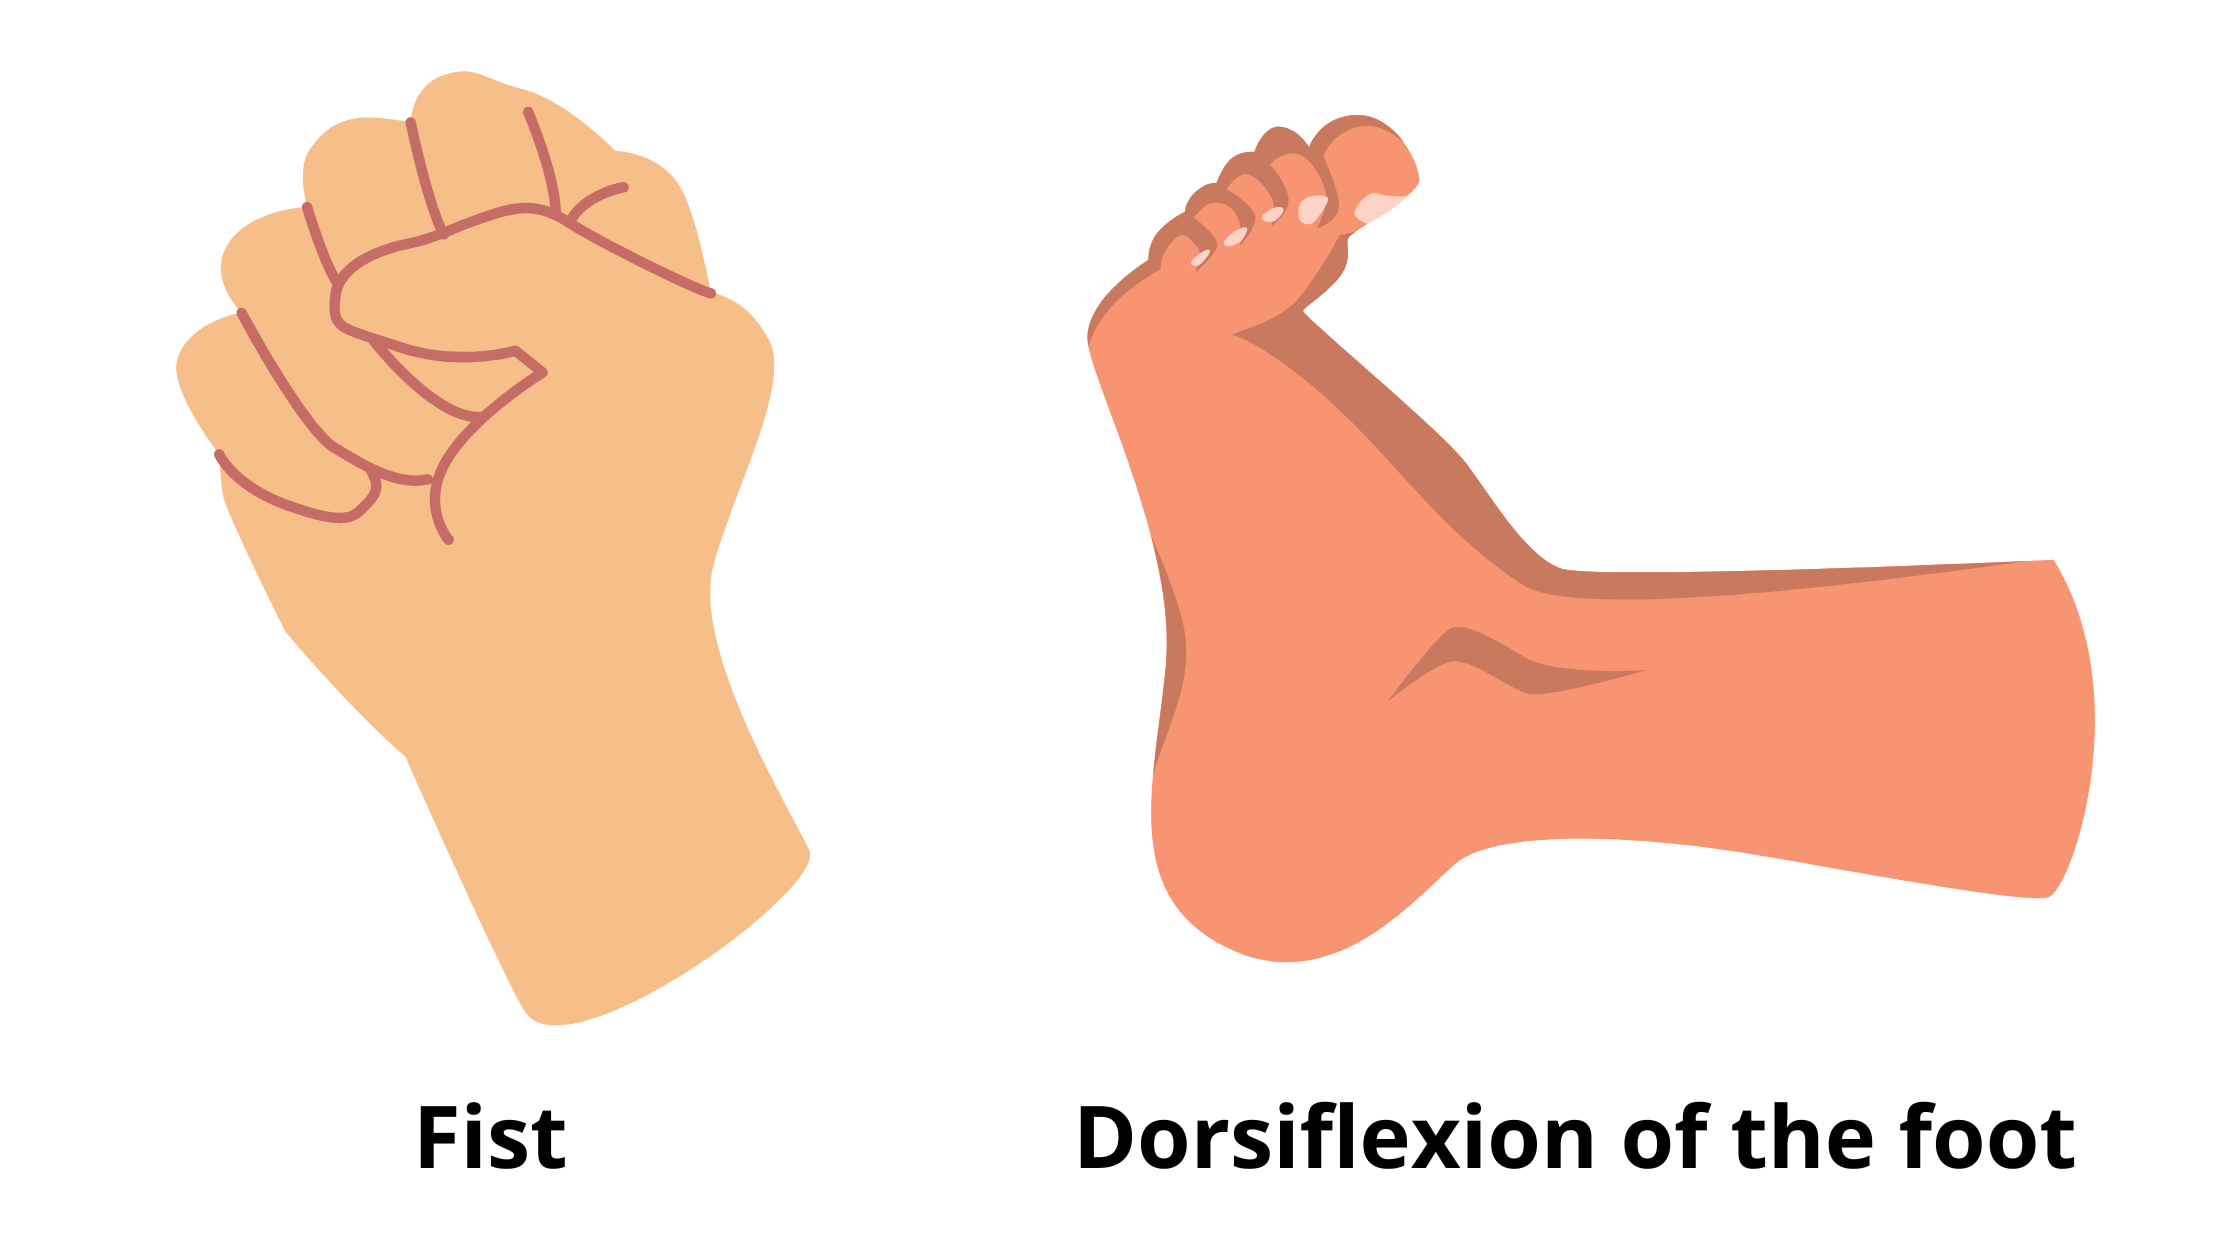 Inability to make a fist or to hammer toes and dorsiflexion of the foot